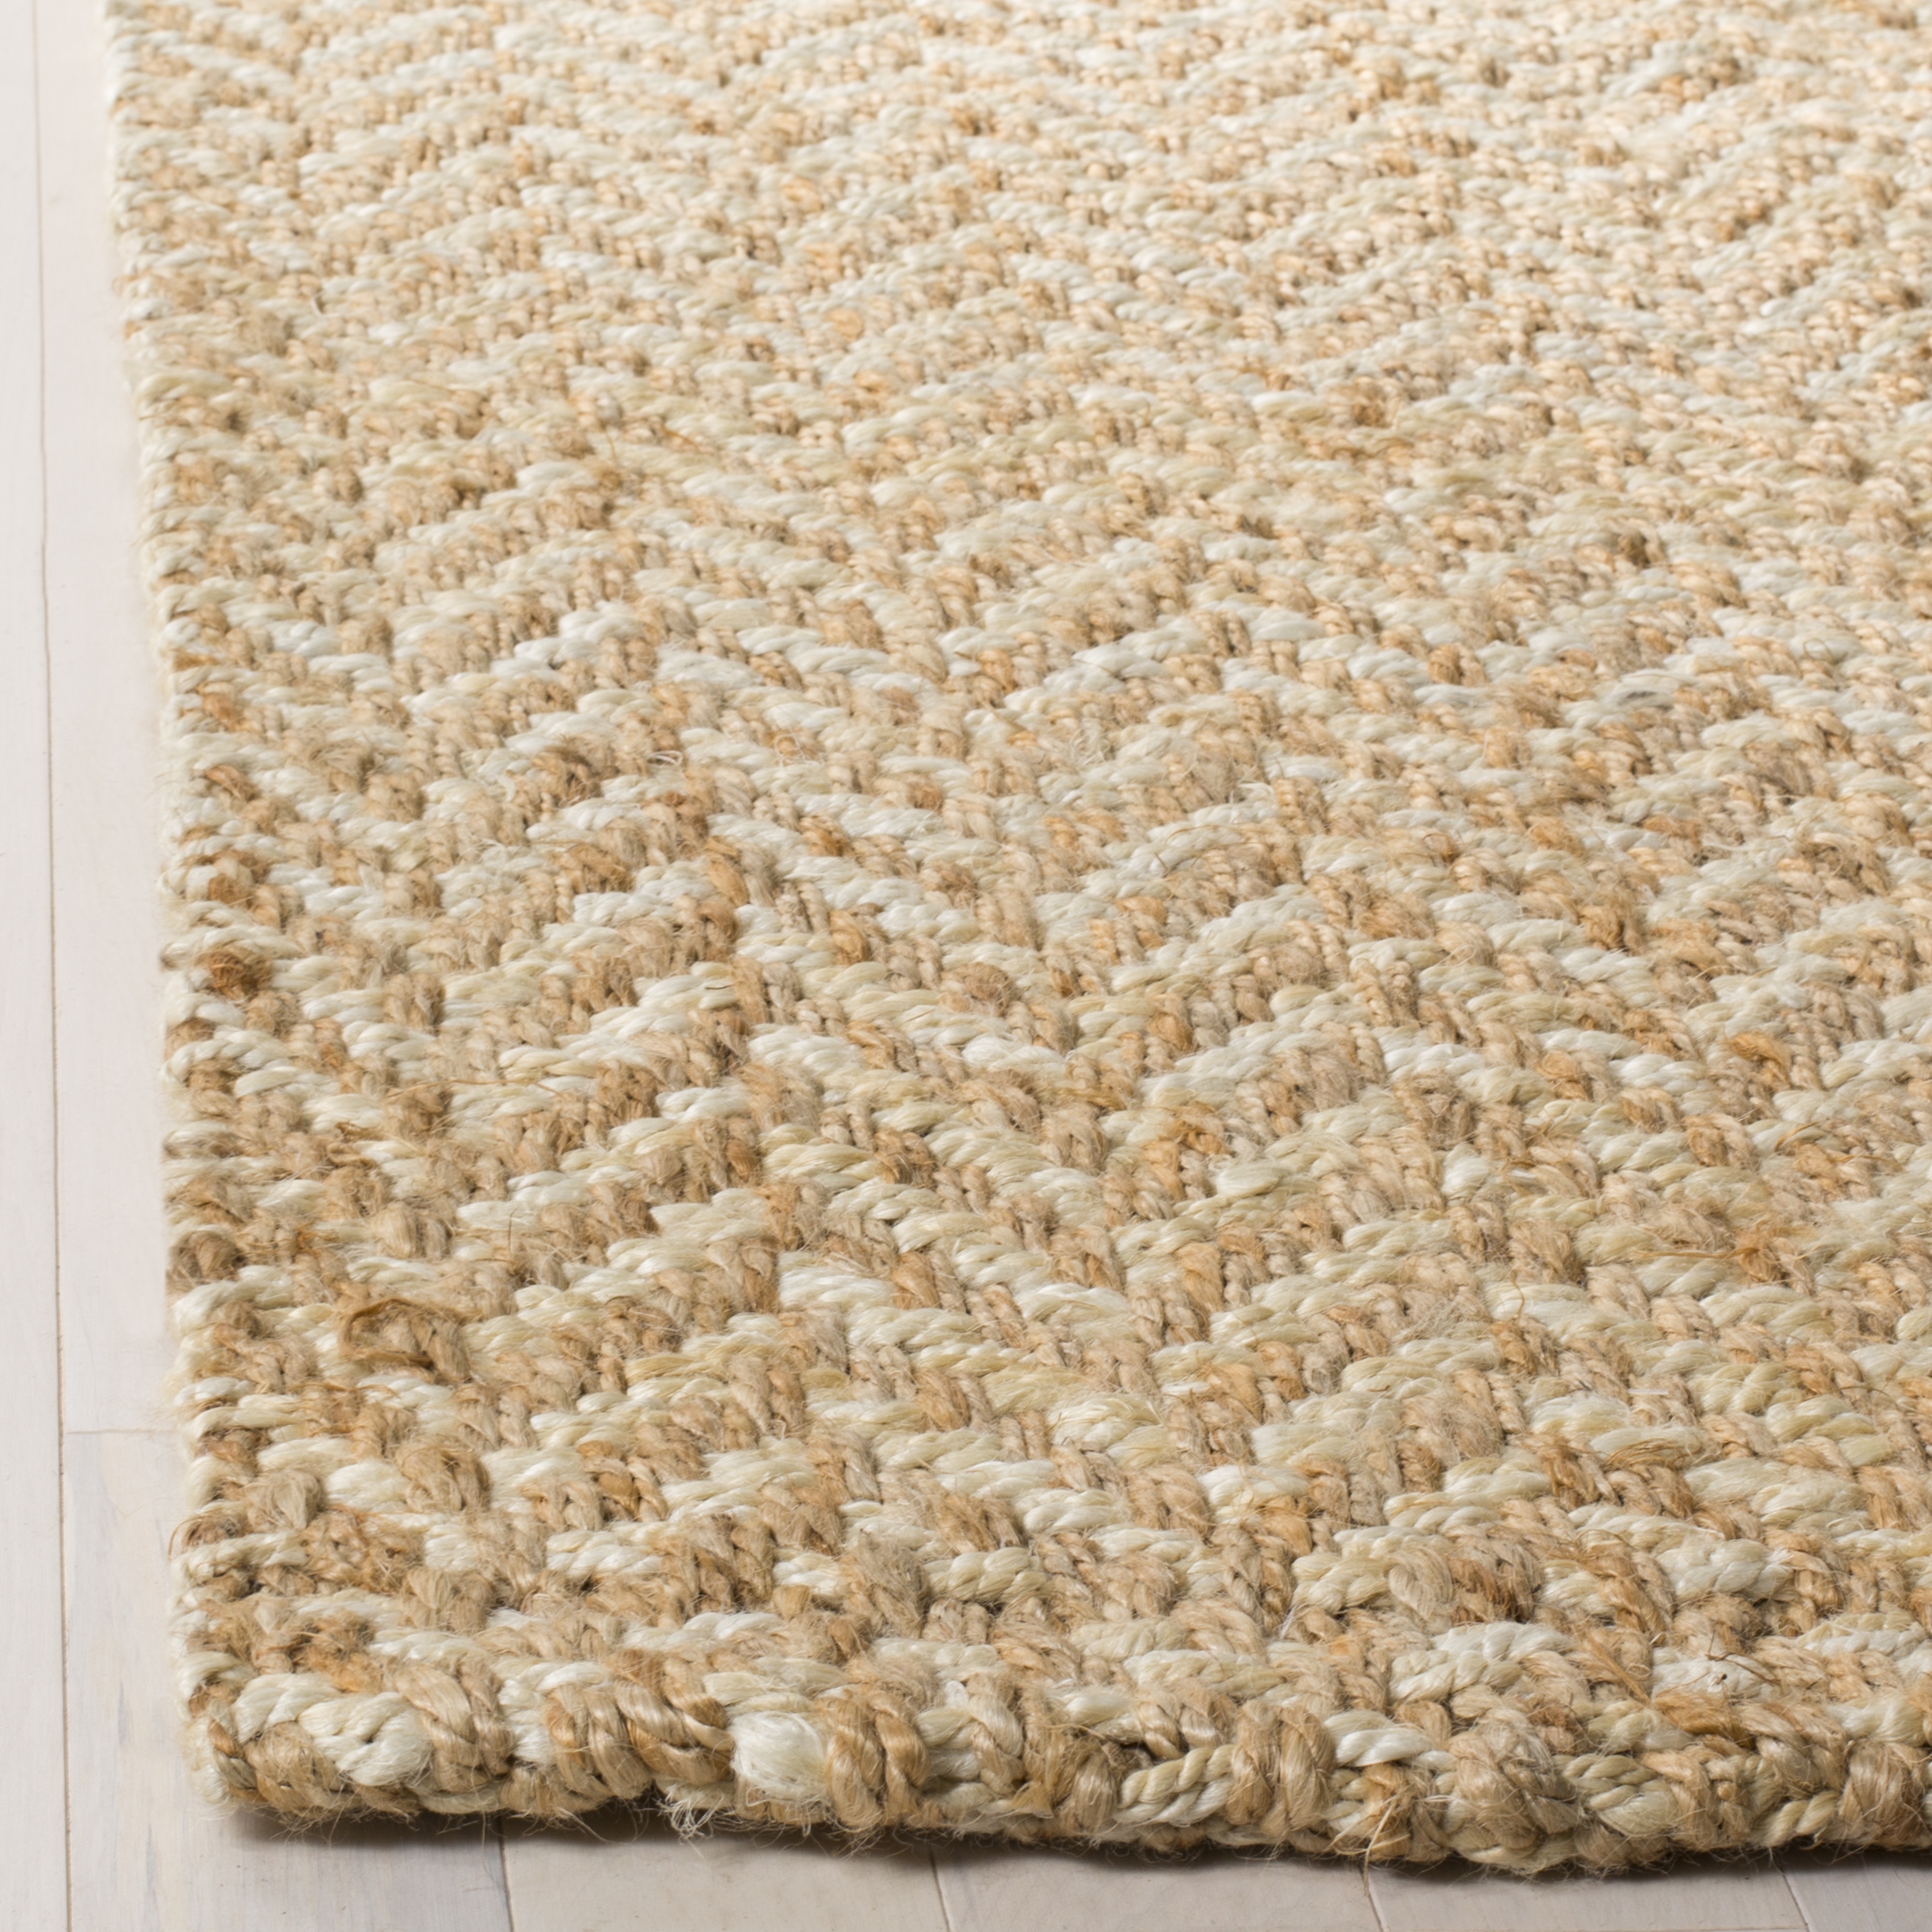 Arlo Home Hand Woven Area Rug, NF264A, Ivory/Natural,  9' X 12' - Image 2